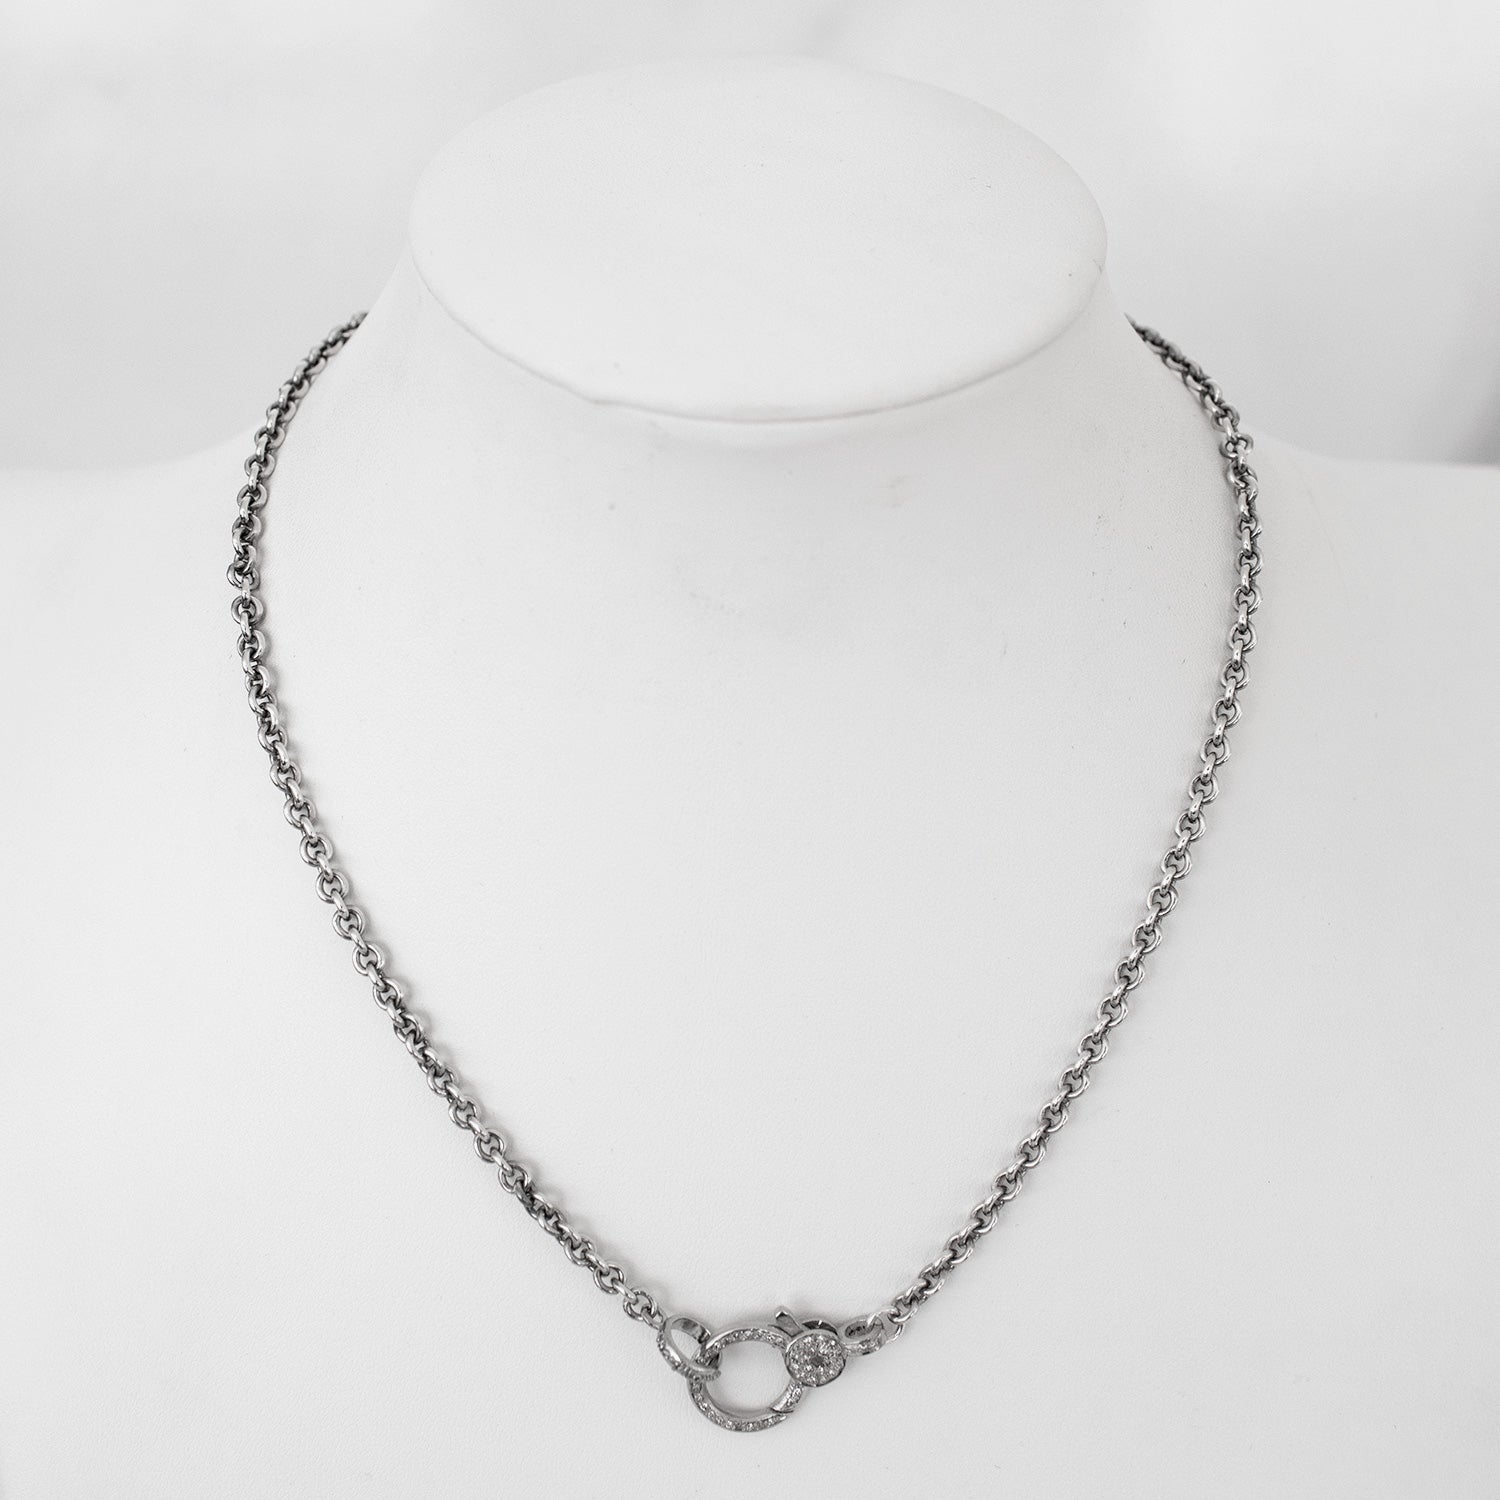 Short Cable Chain Necklace with Diamond Claw Clasp - 17" NB000384 - TBird